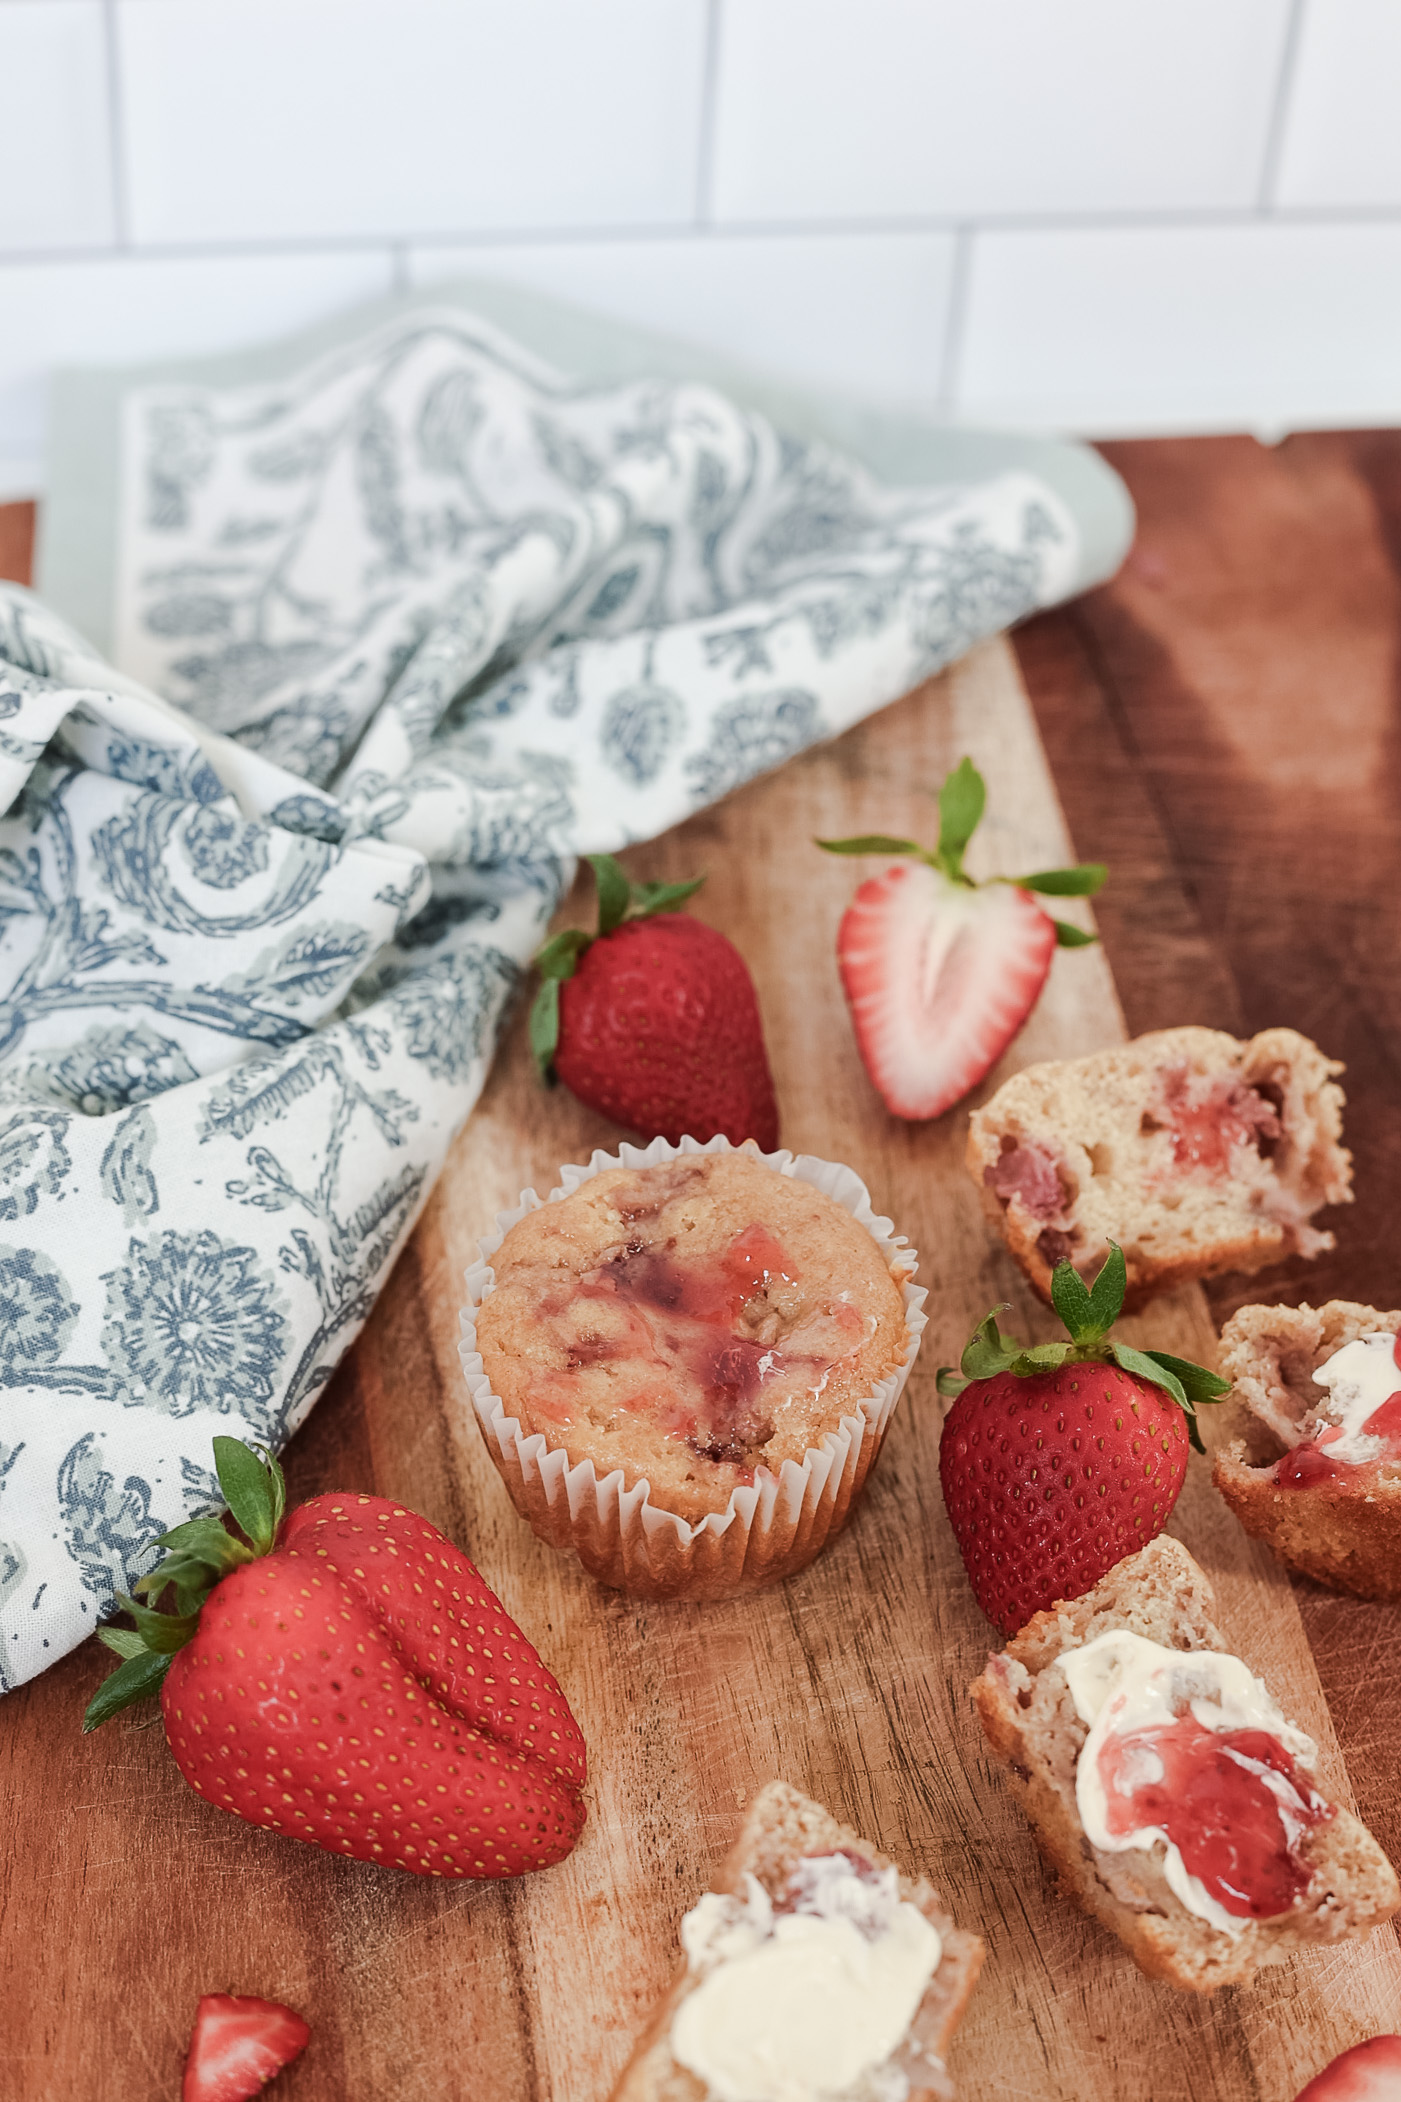 Strawberries and strawberry muffins on a wooden cutting board with white and blue floral napkin